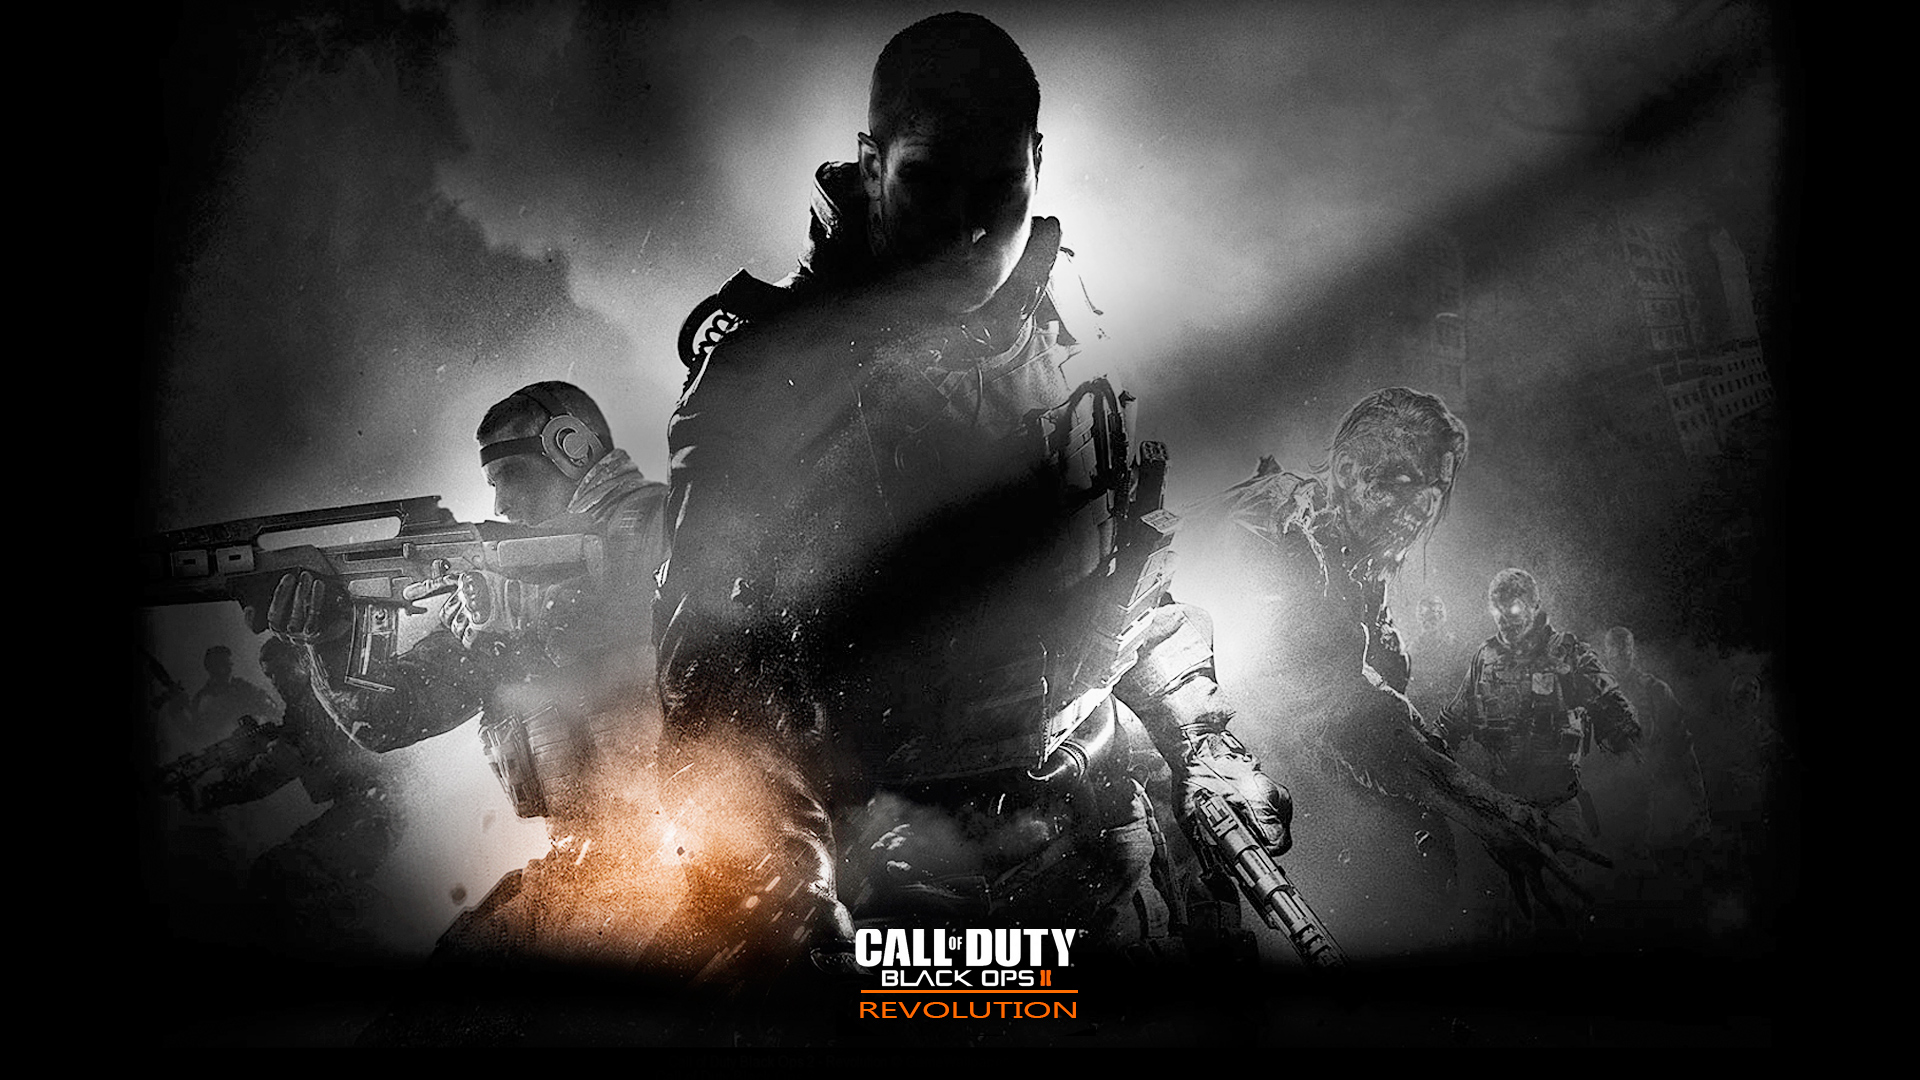 Call Of Duty Black Ops 2 Revolution Wallpapers HD Wallpapers 1920x1080